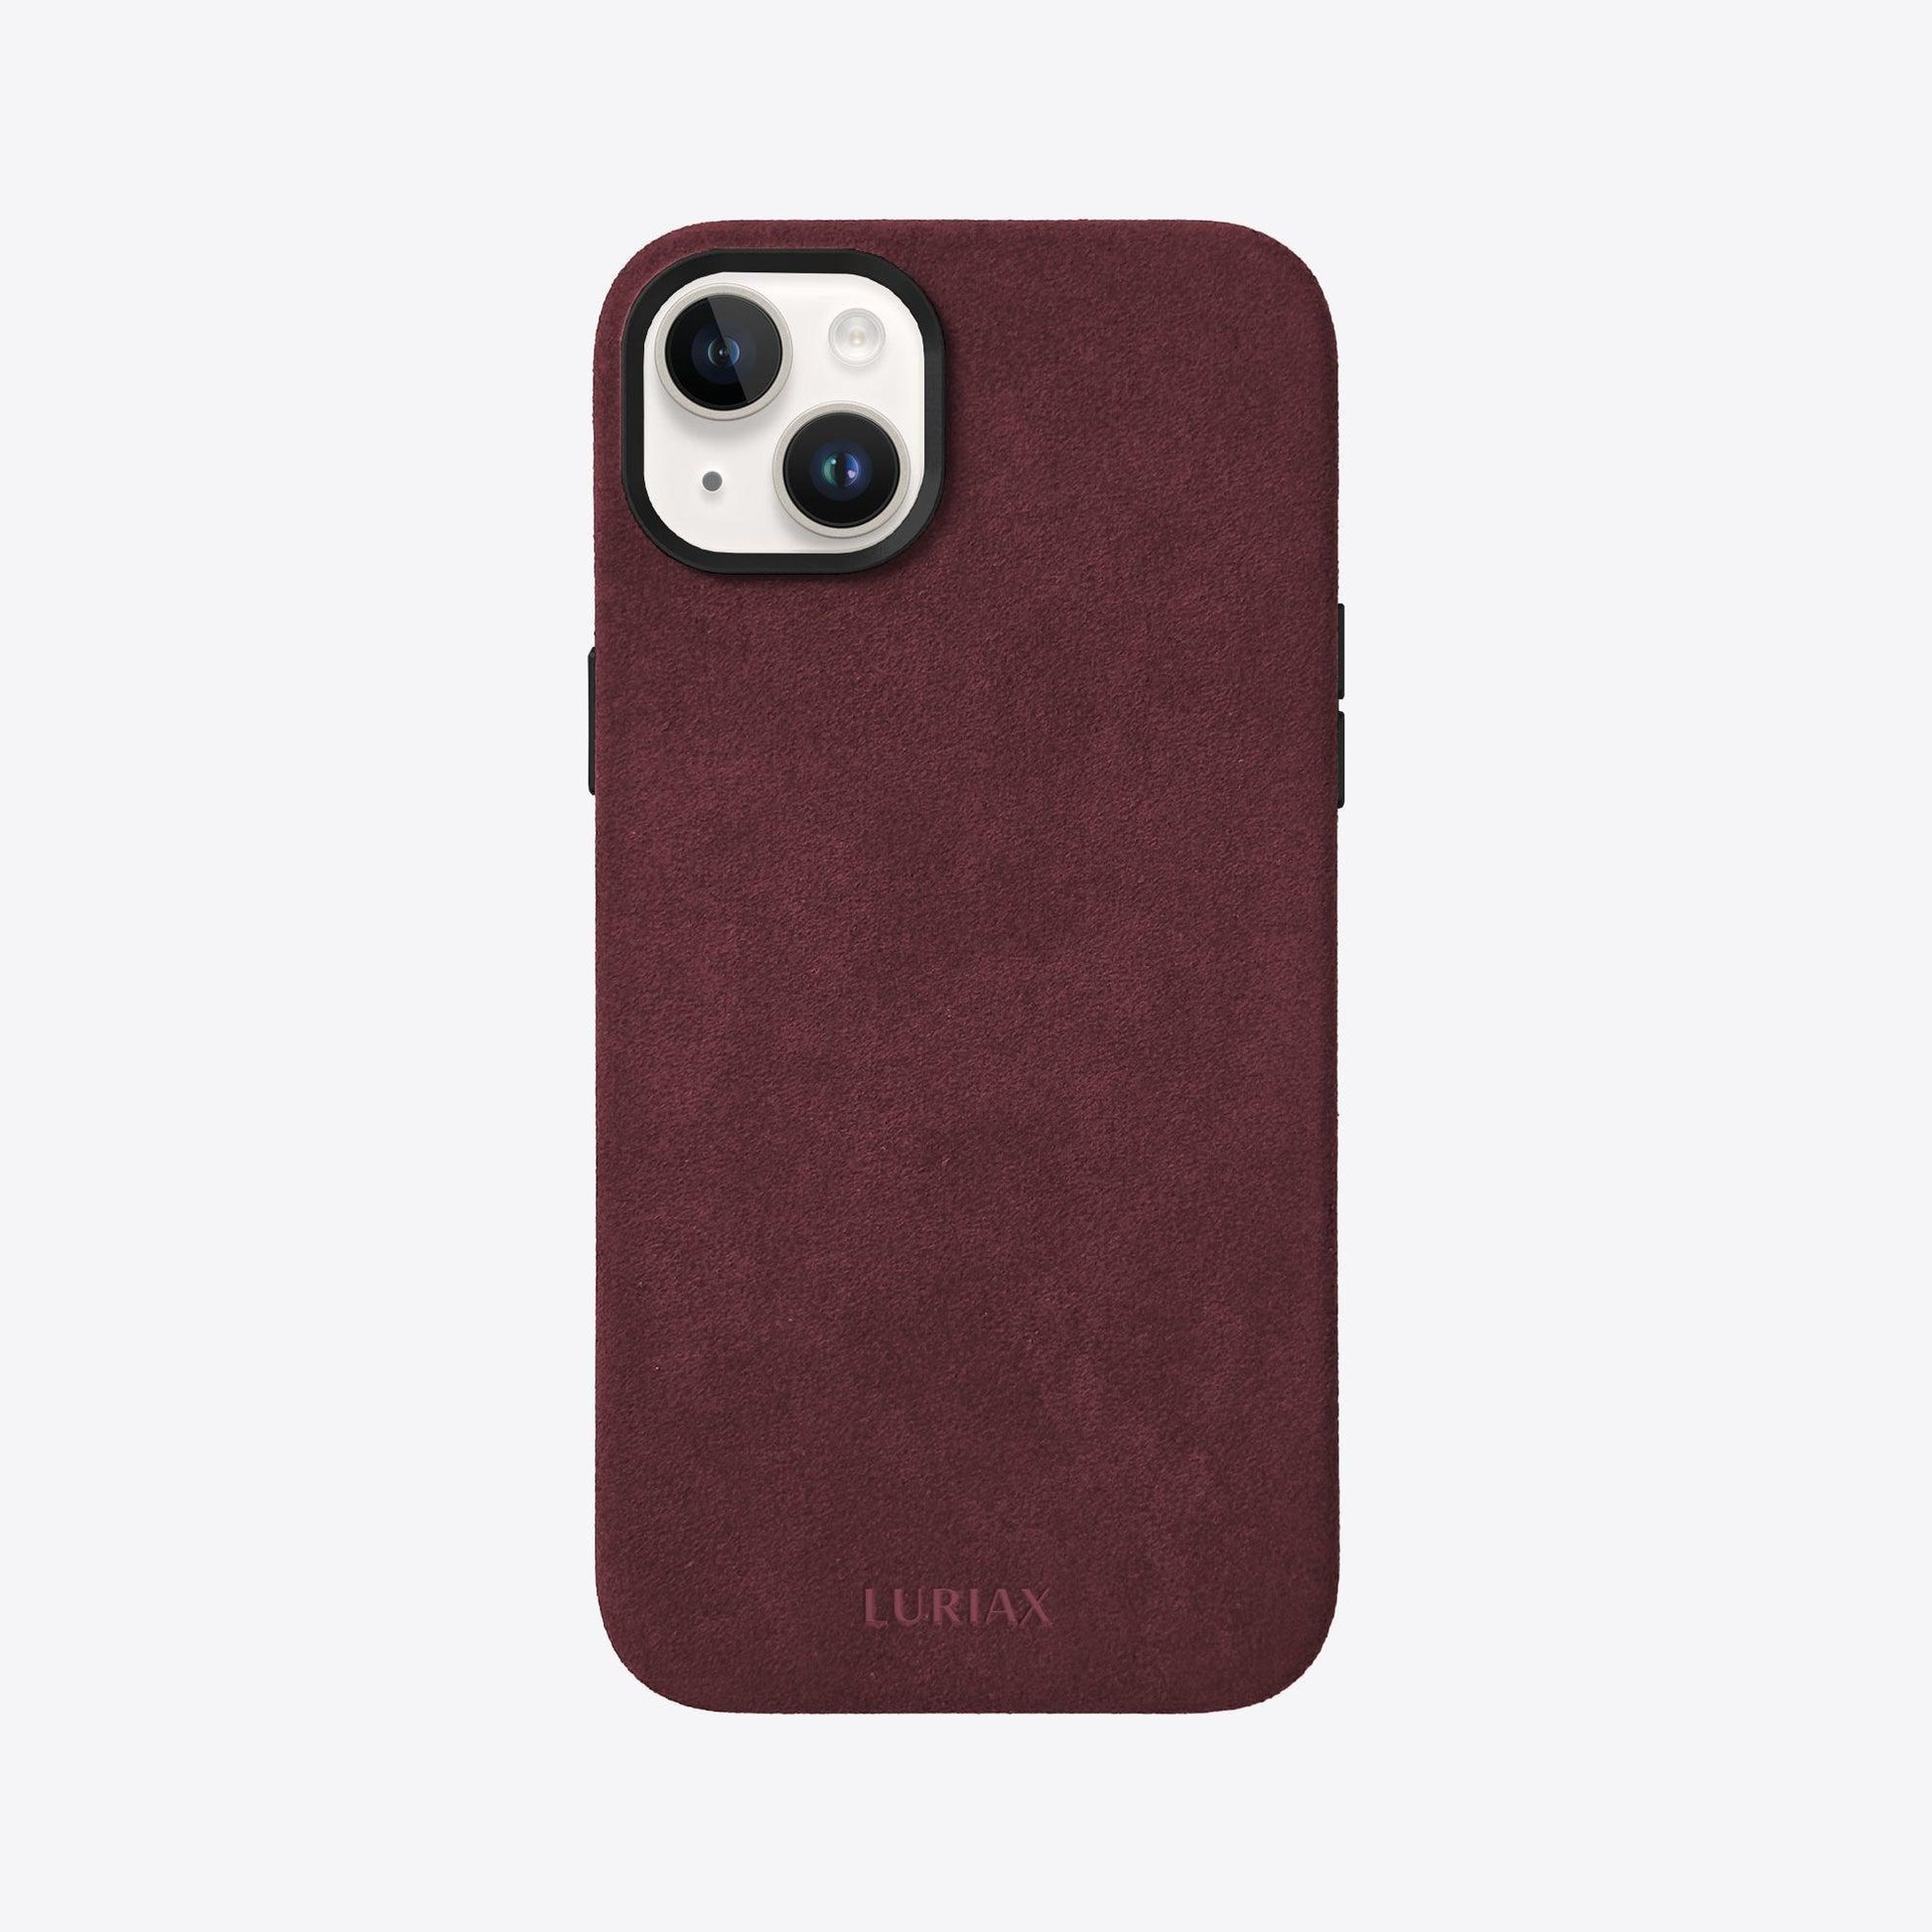 Alcantara Suede Leather iPhone Case and Accessories Collection - The Classic iPhone Case - Burgundy - Luriax